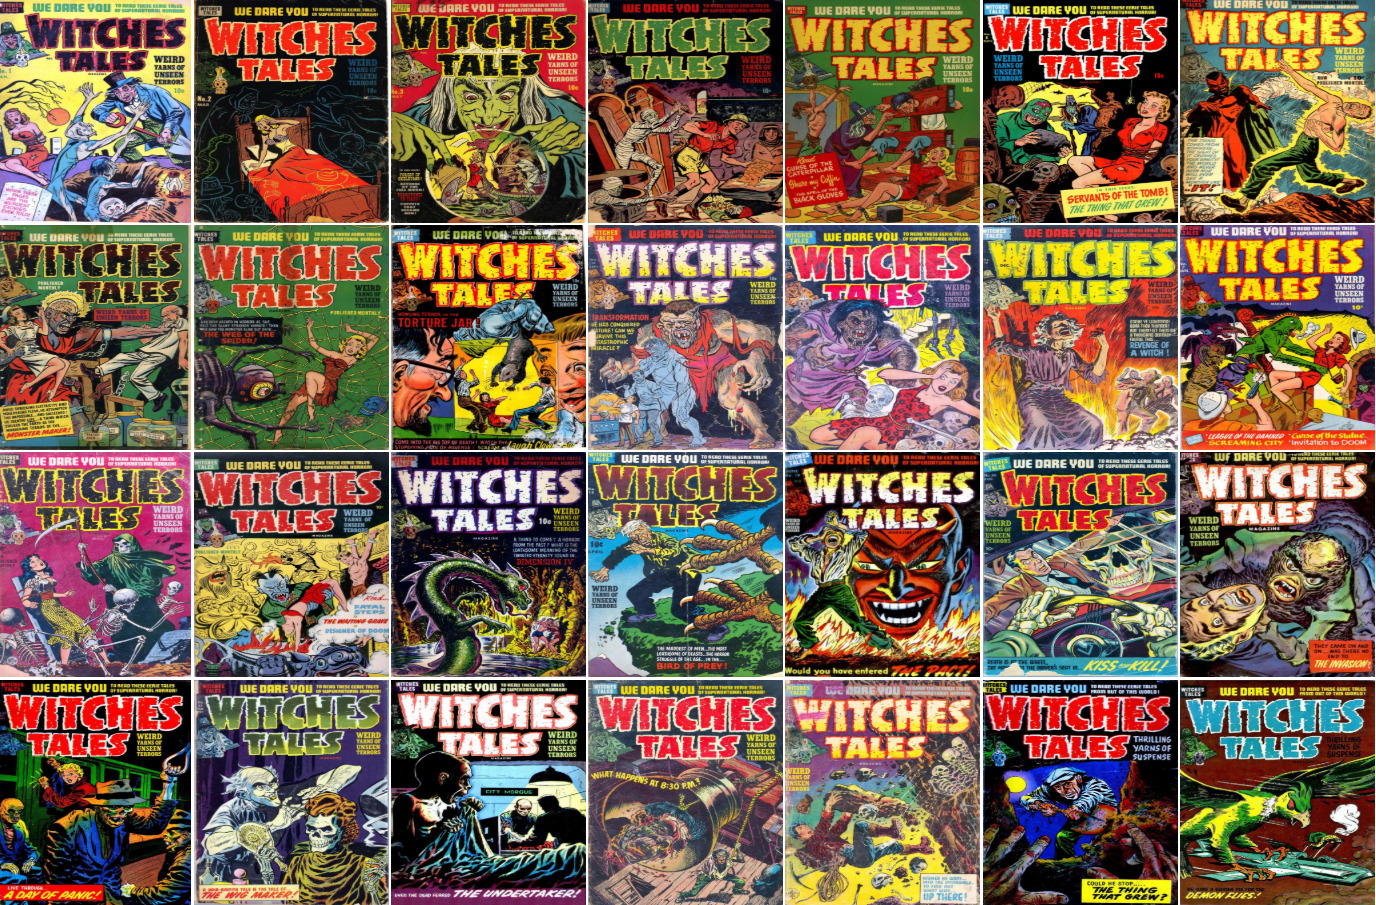 1951 - 1954 Witches Tales Comic Book Package - 28 eBooks on CD